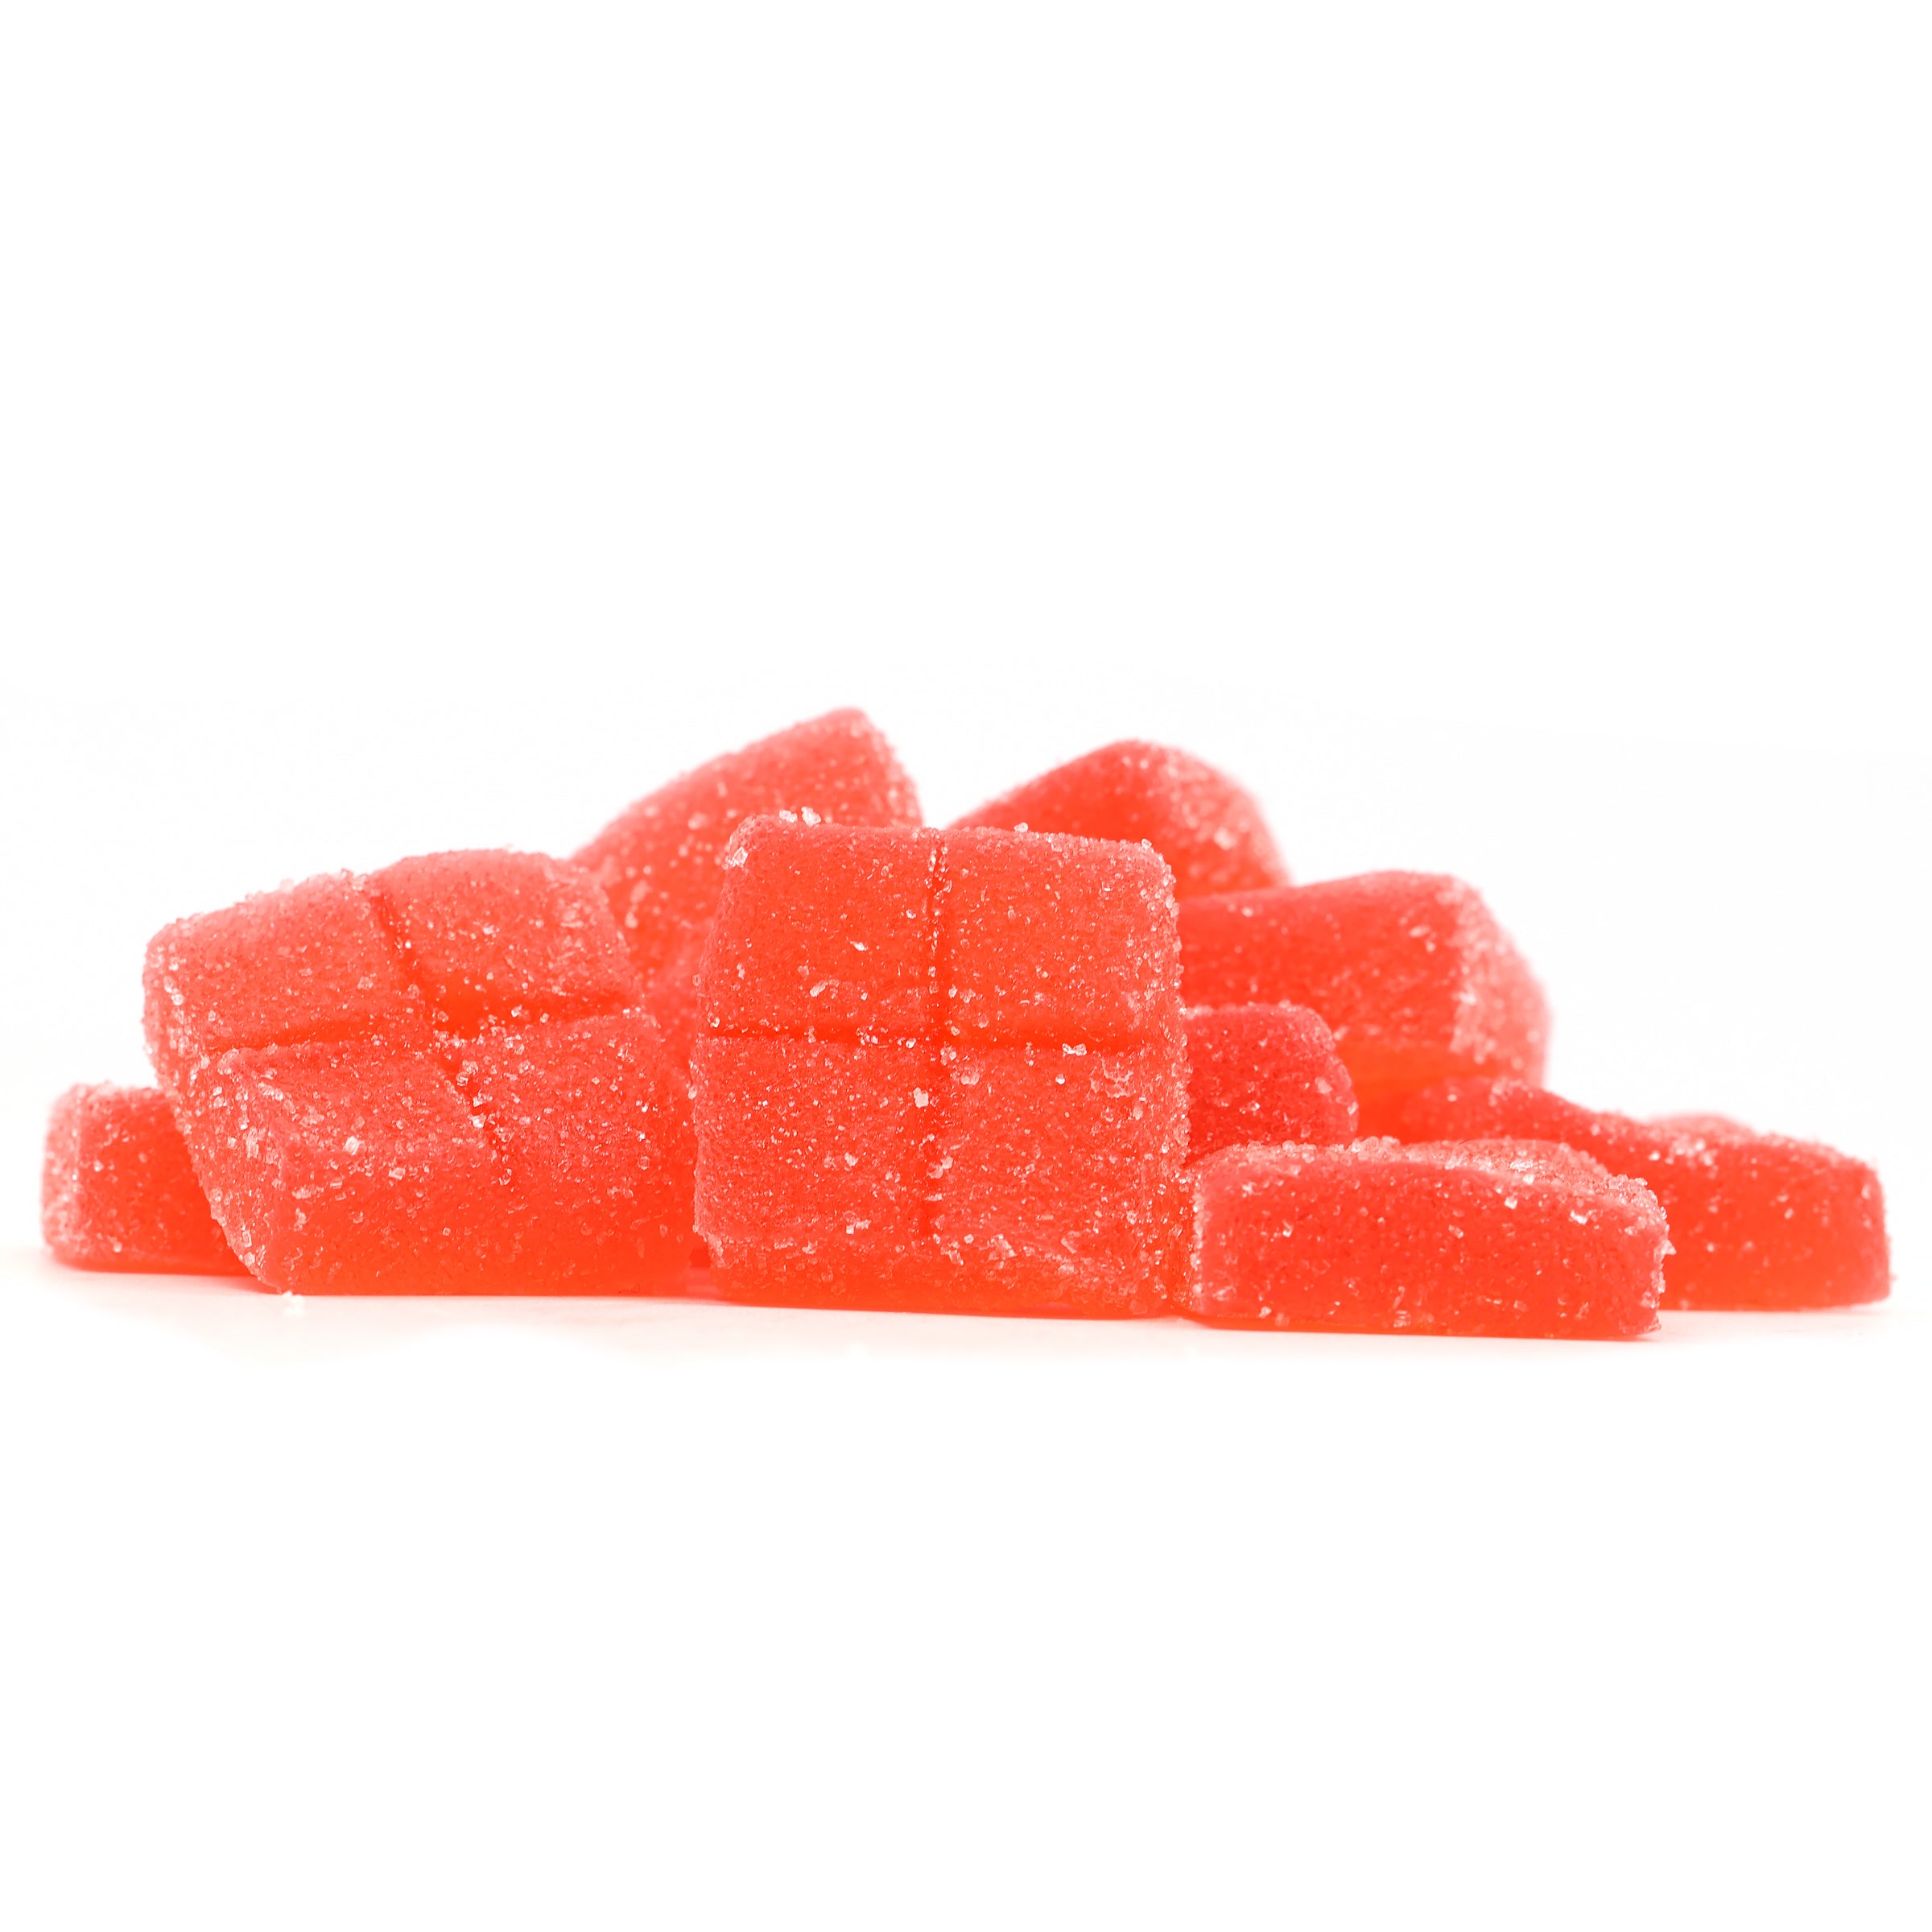 Watermelon Delta-9 Microdose Gummies: 10 Pack from Botany Farms